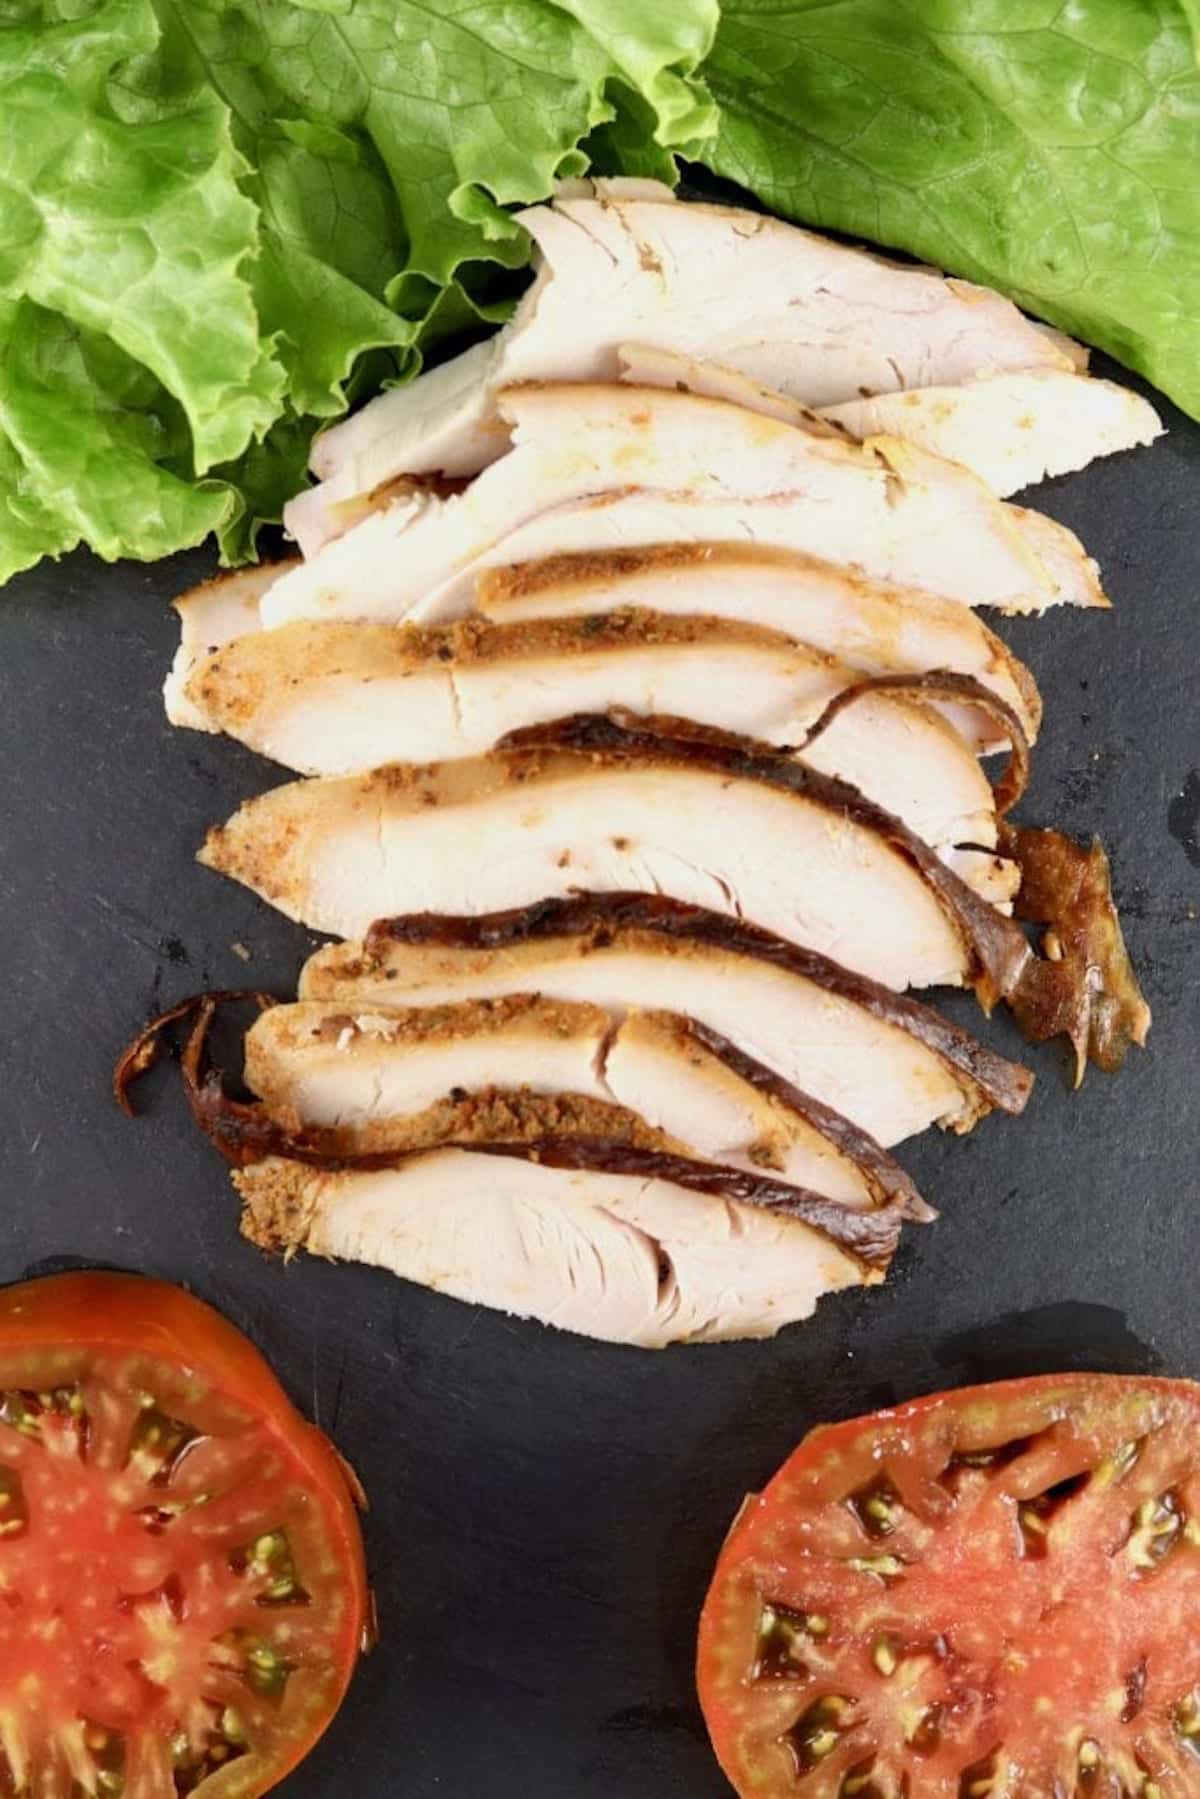 Sliced turkey with lettuce and sliced tomatoes.